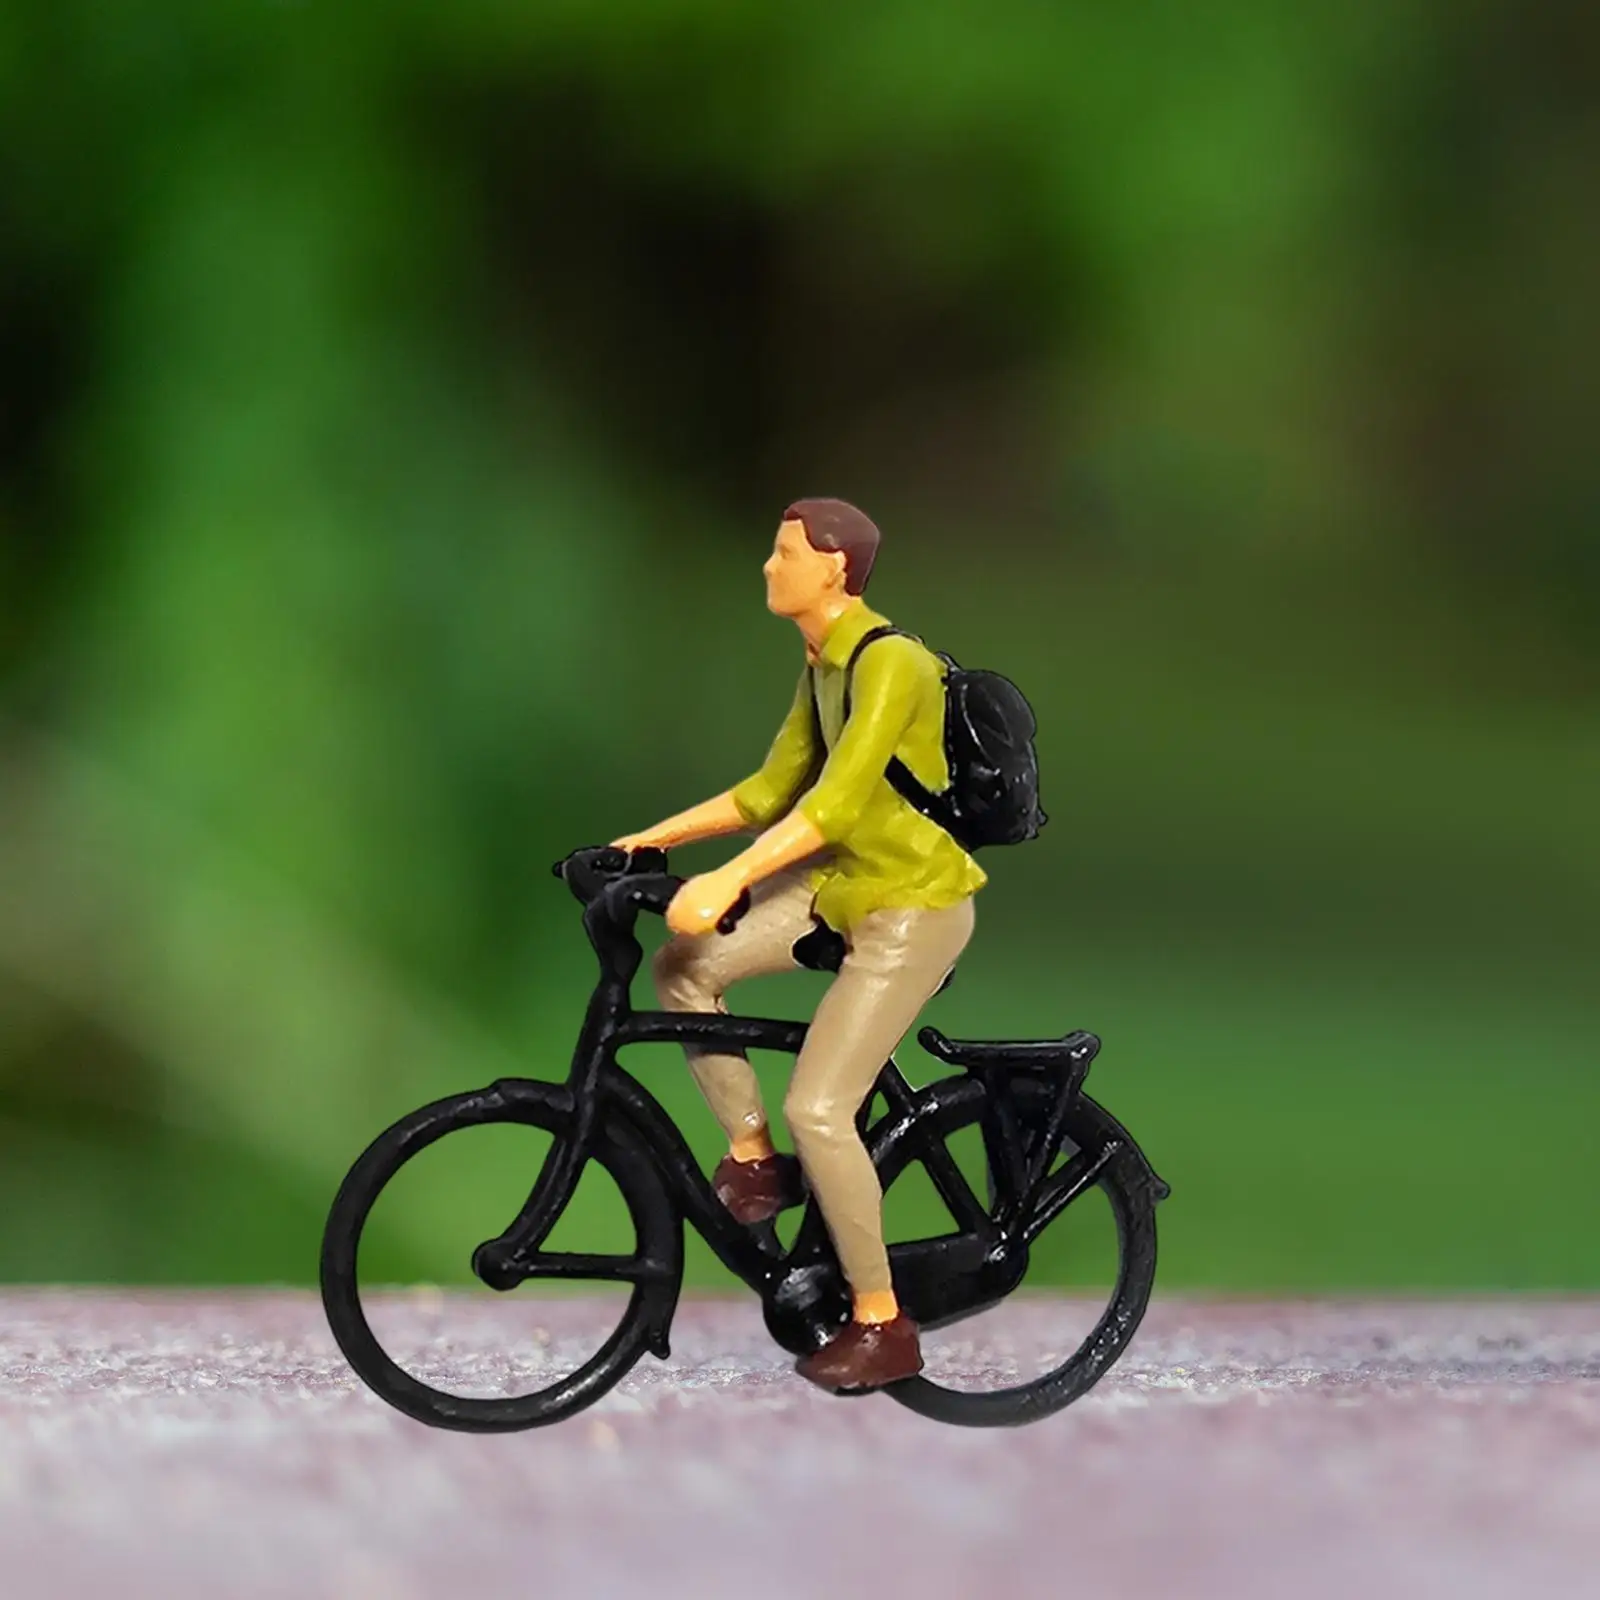 Resin 1/87 Scale Cyclist Figurine Mini People Model for Cycling Scene Layout